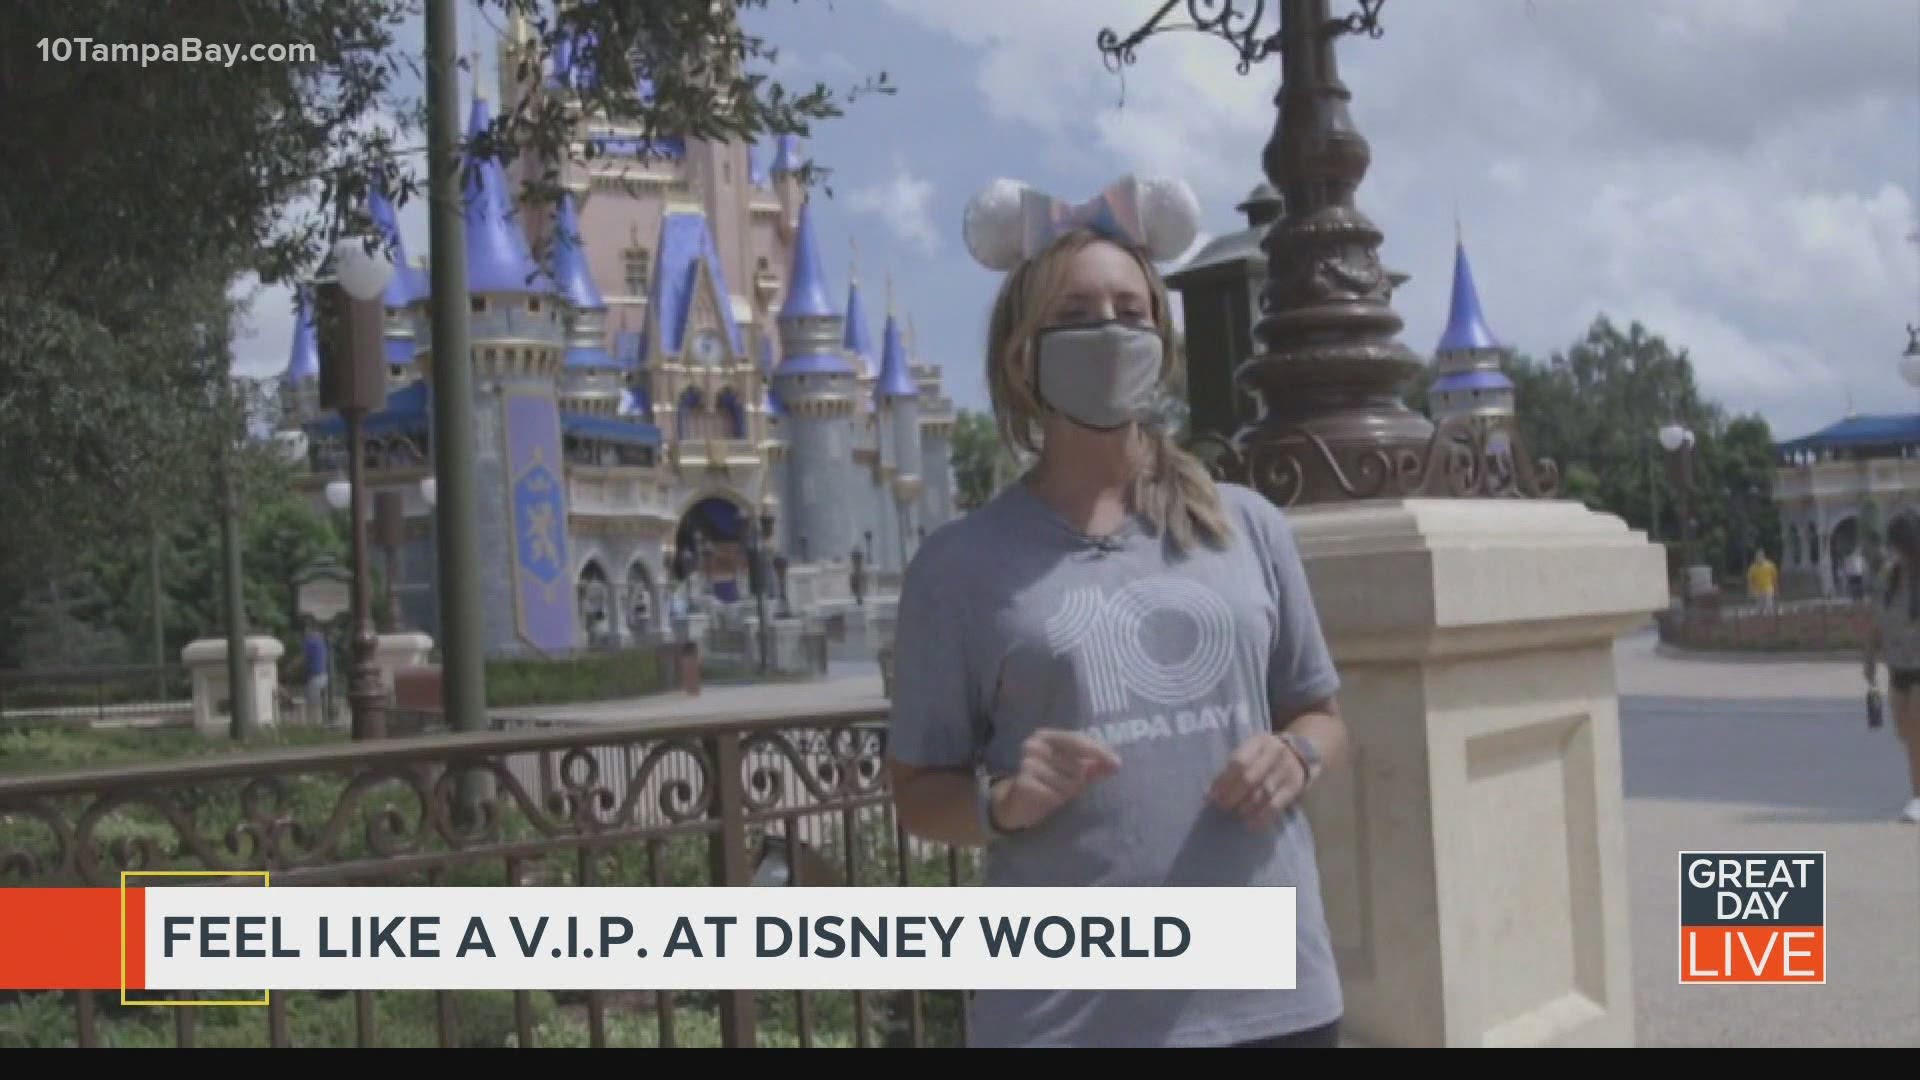 Hate long lines? Feel like a V.I.P. right now at Walt Disney World